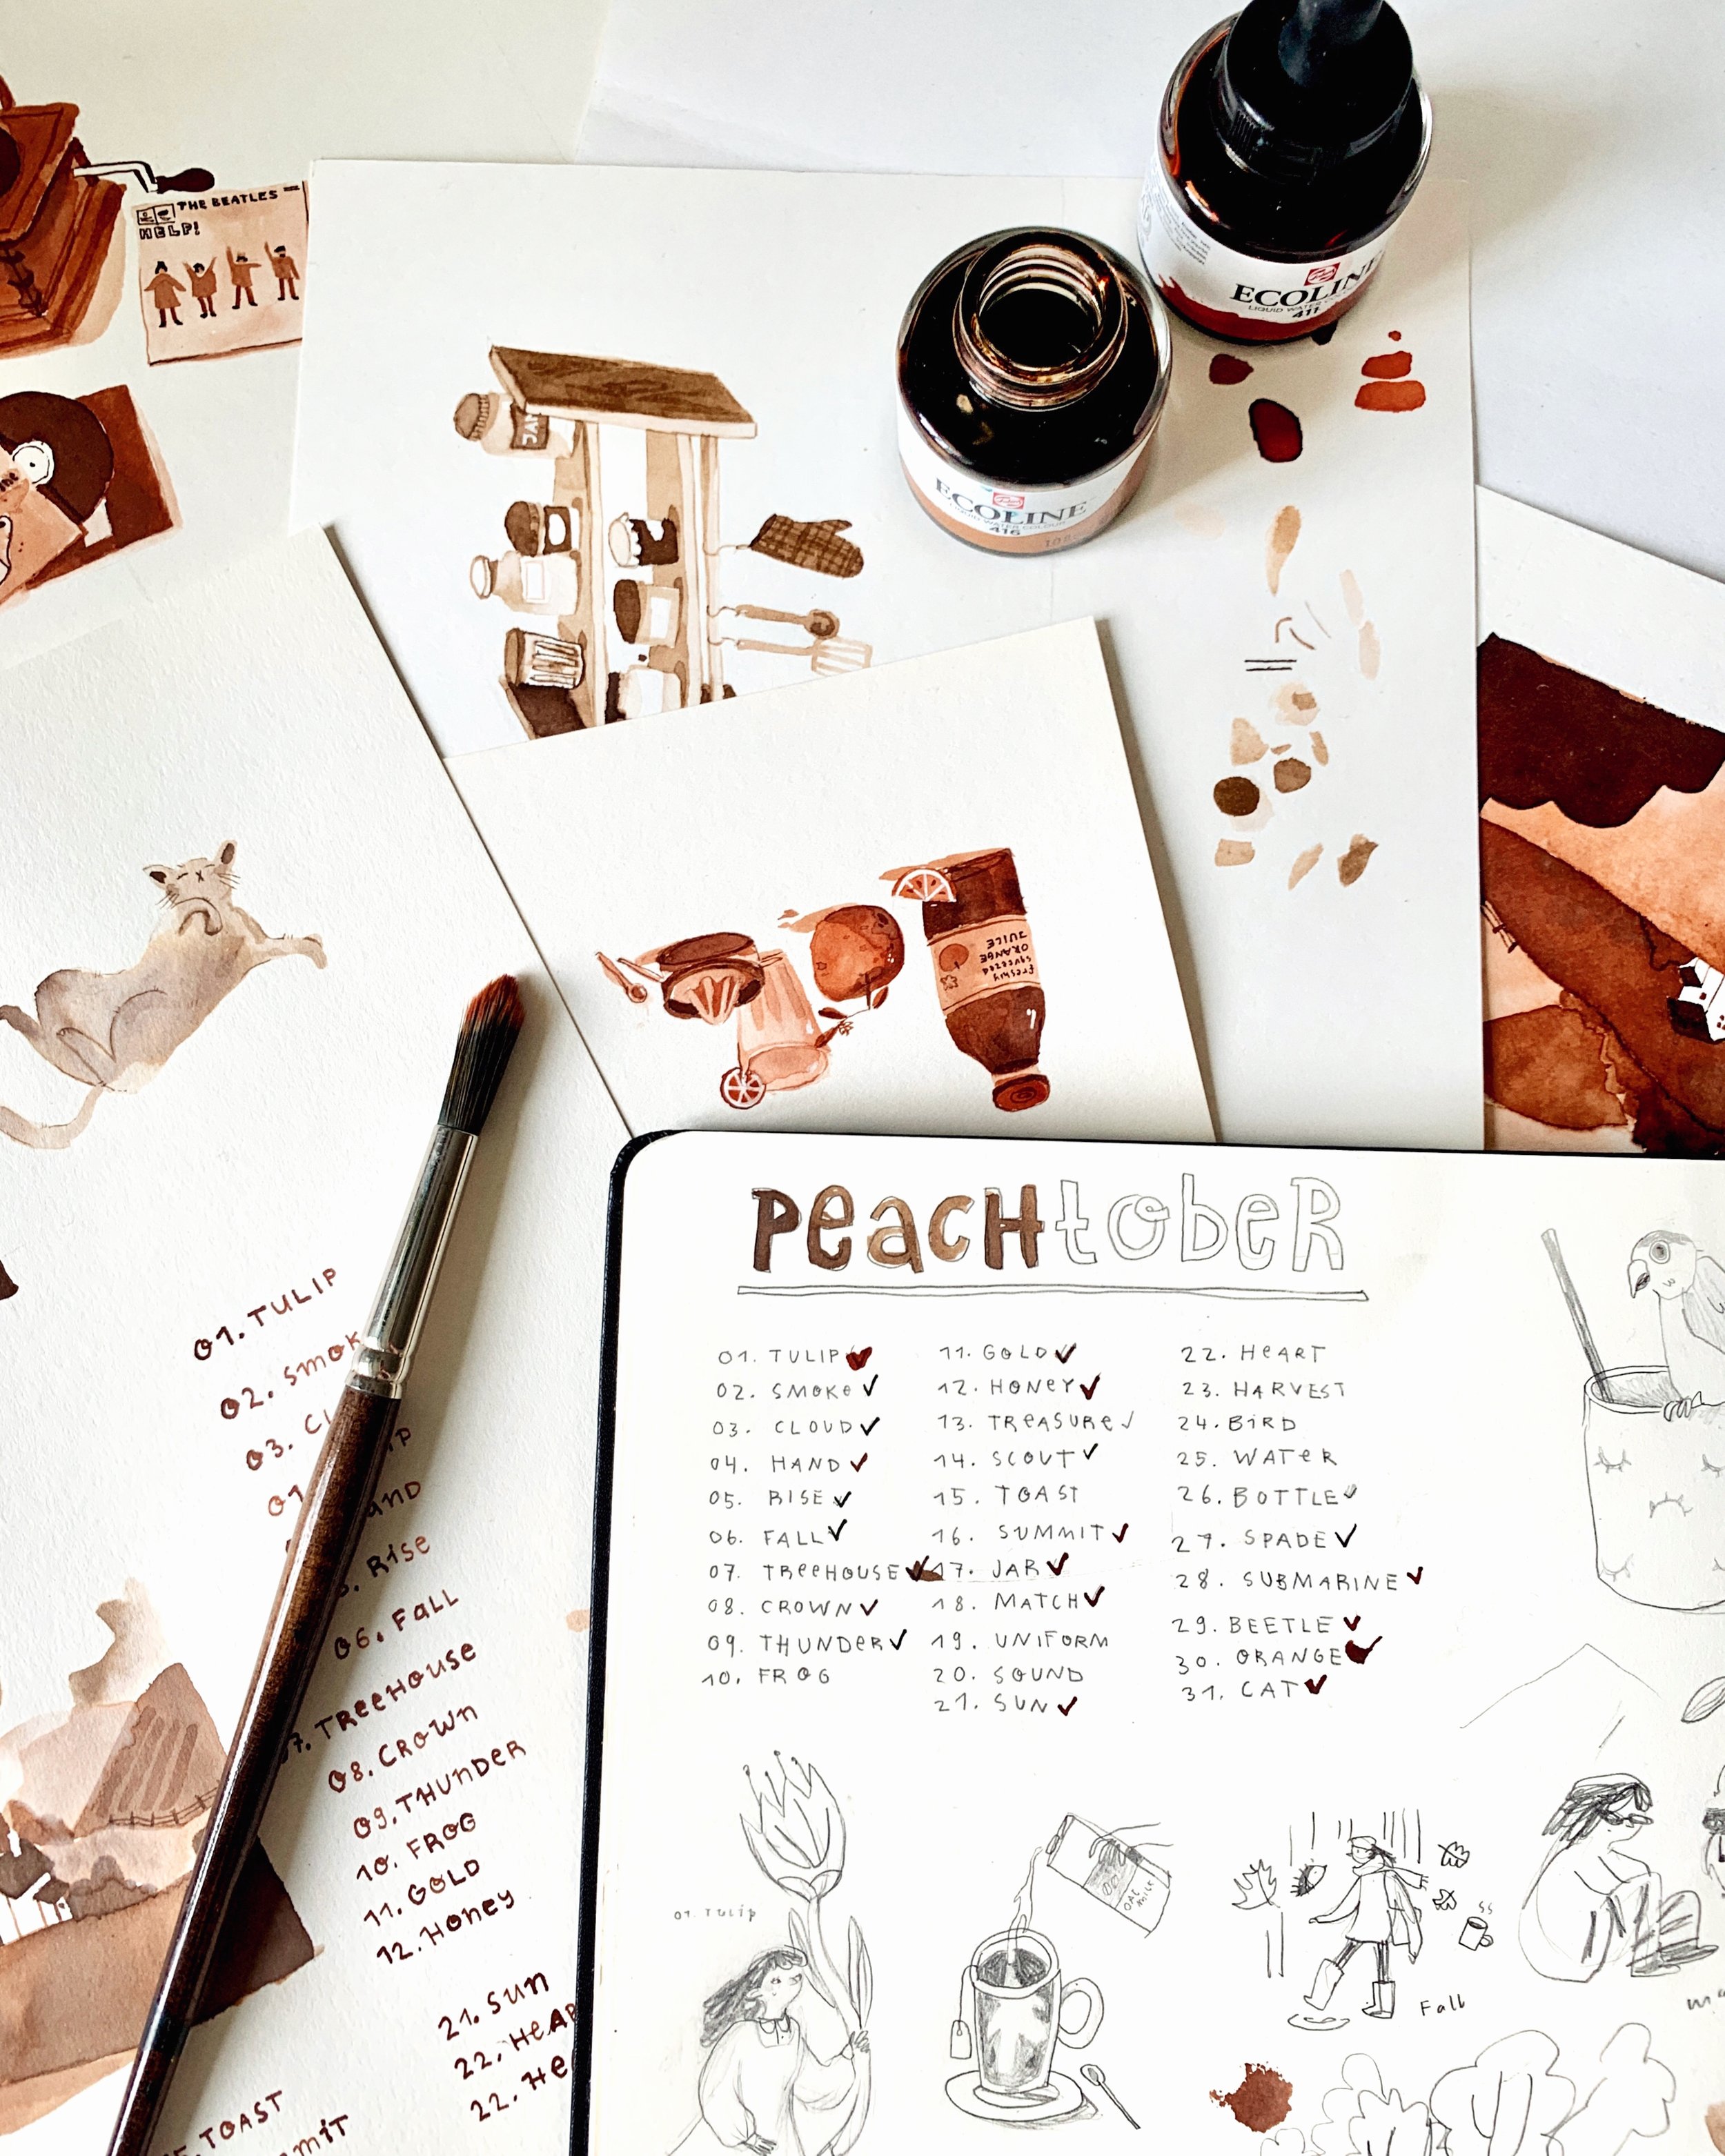 Find Your Next Sketchbook Drawing Idea